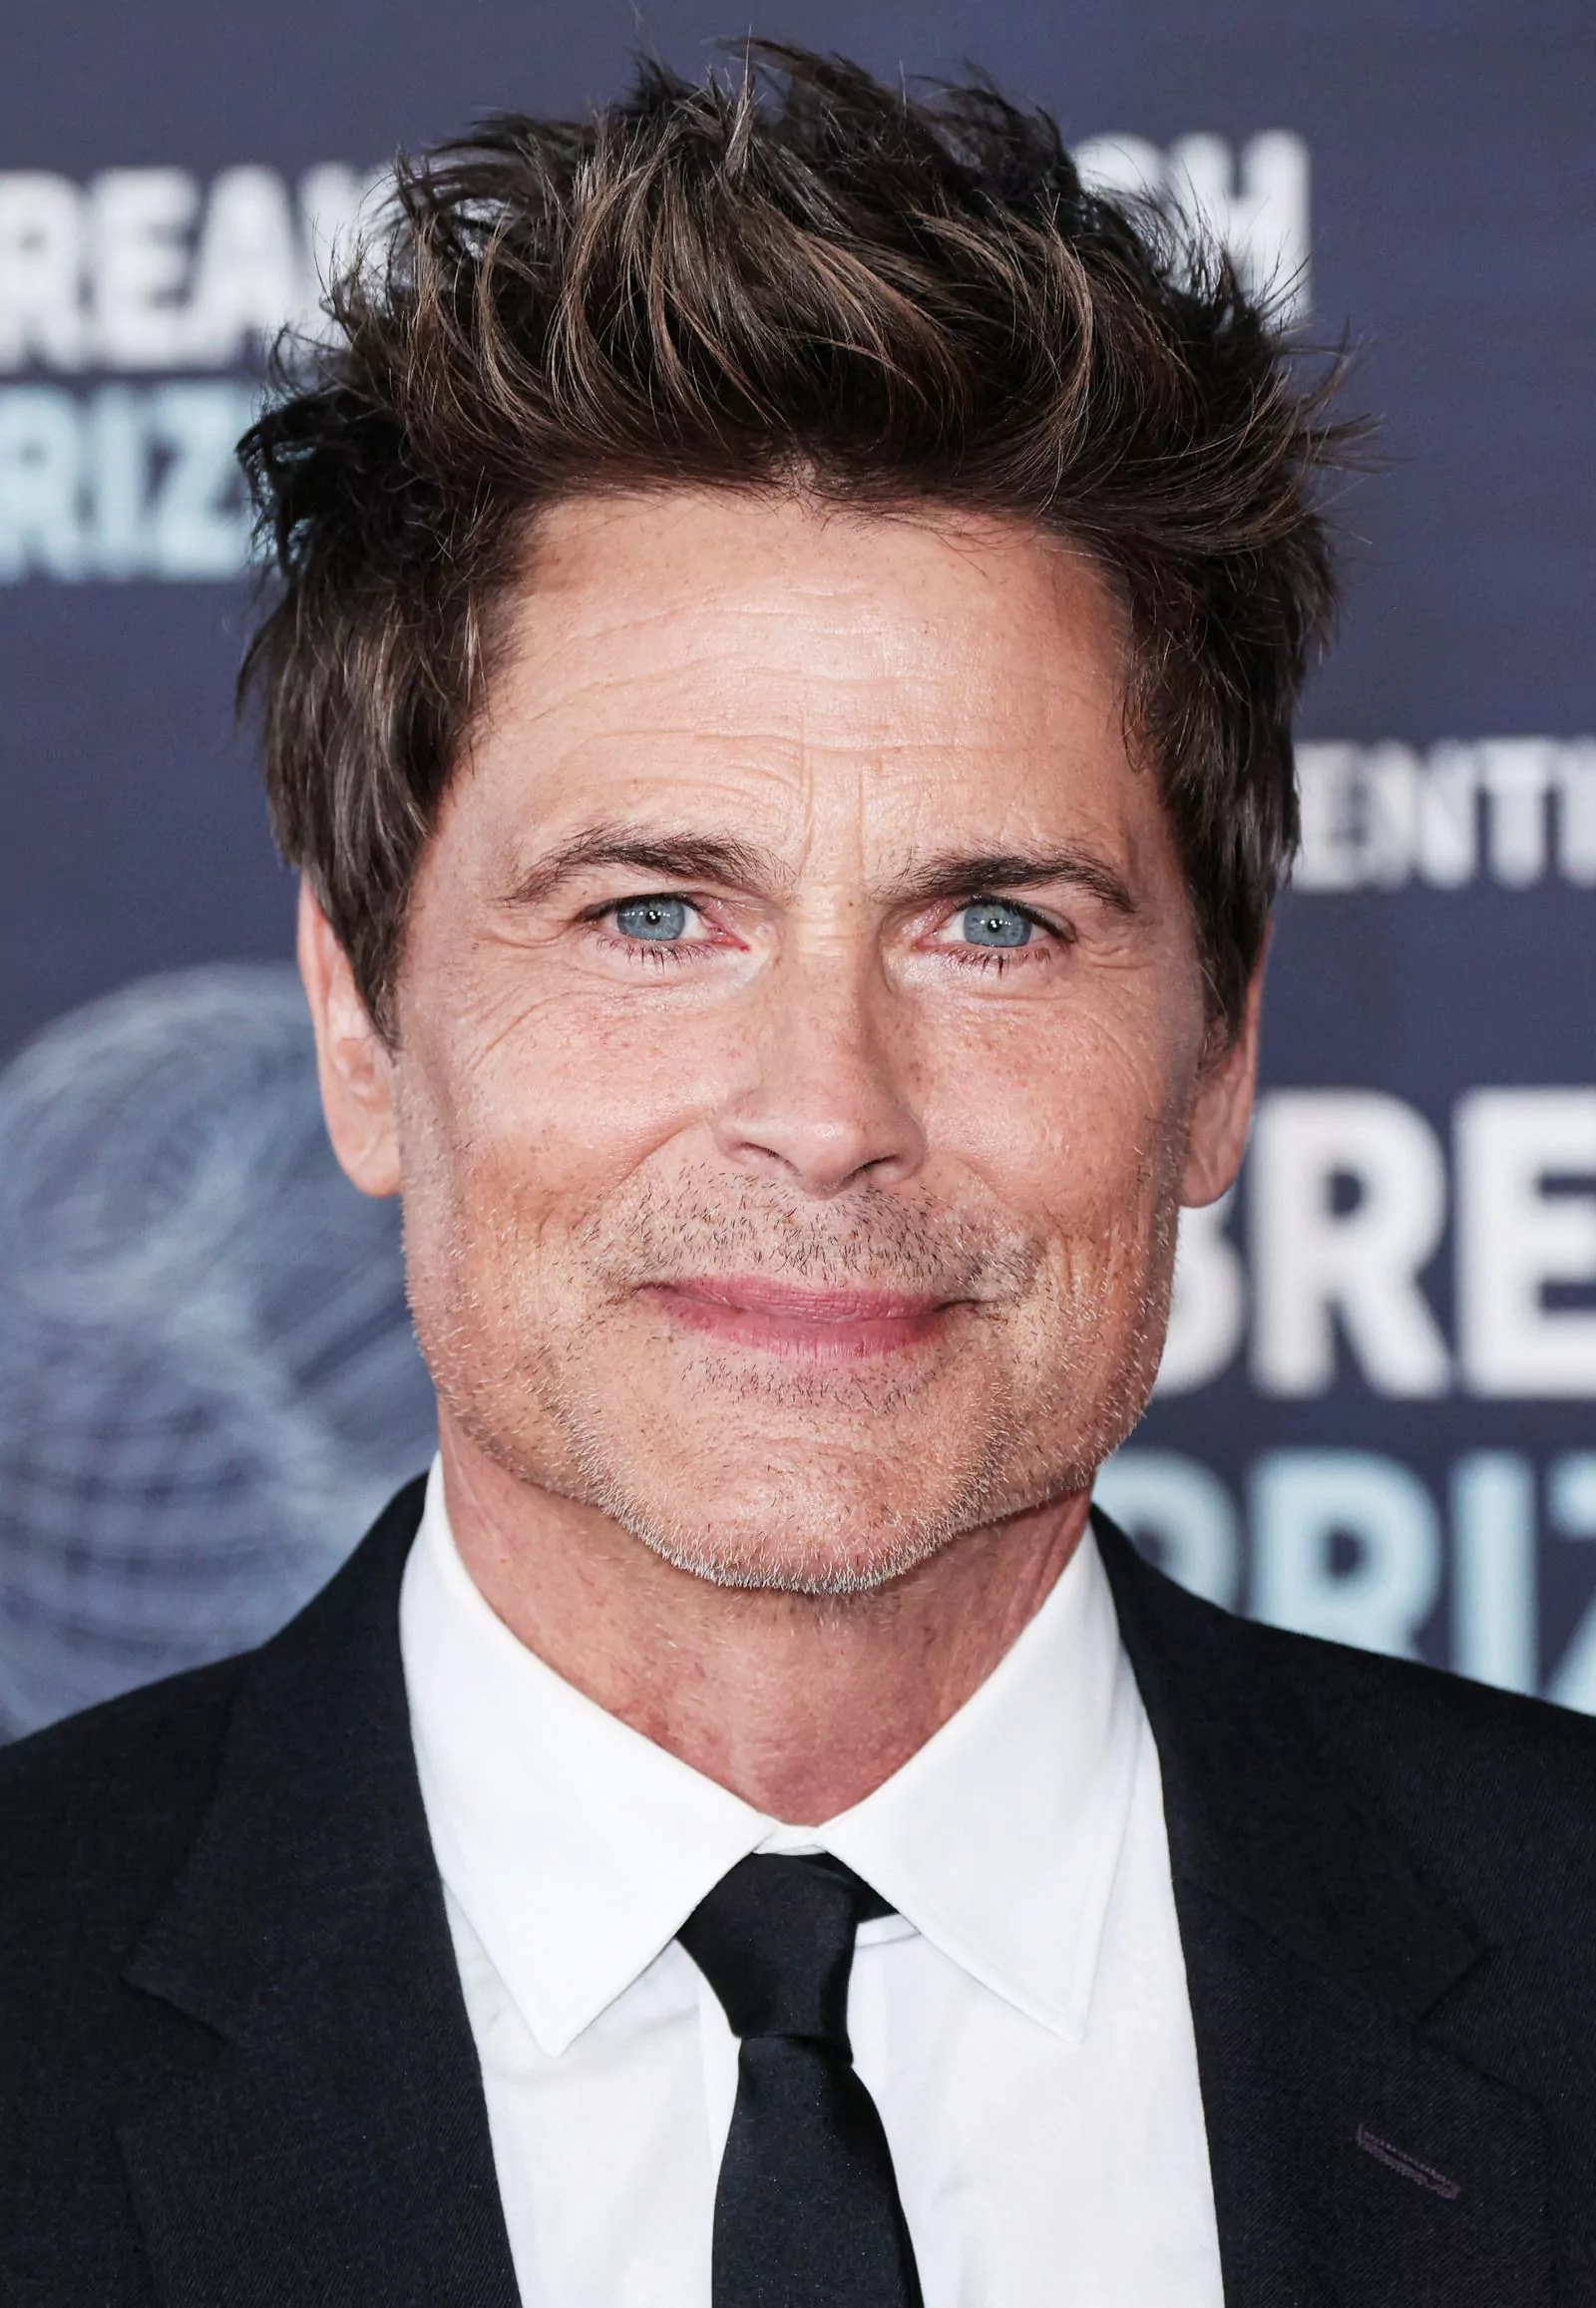 Rob Lowe at the 9th Annual Breakthrough Awards in Los Angeles on April 15, 2023.